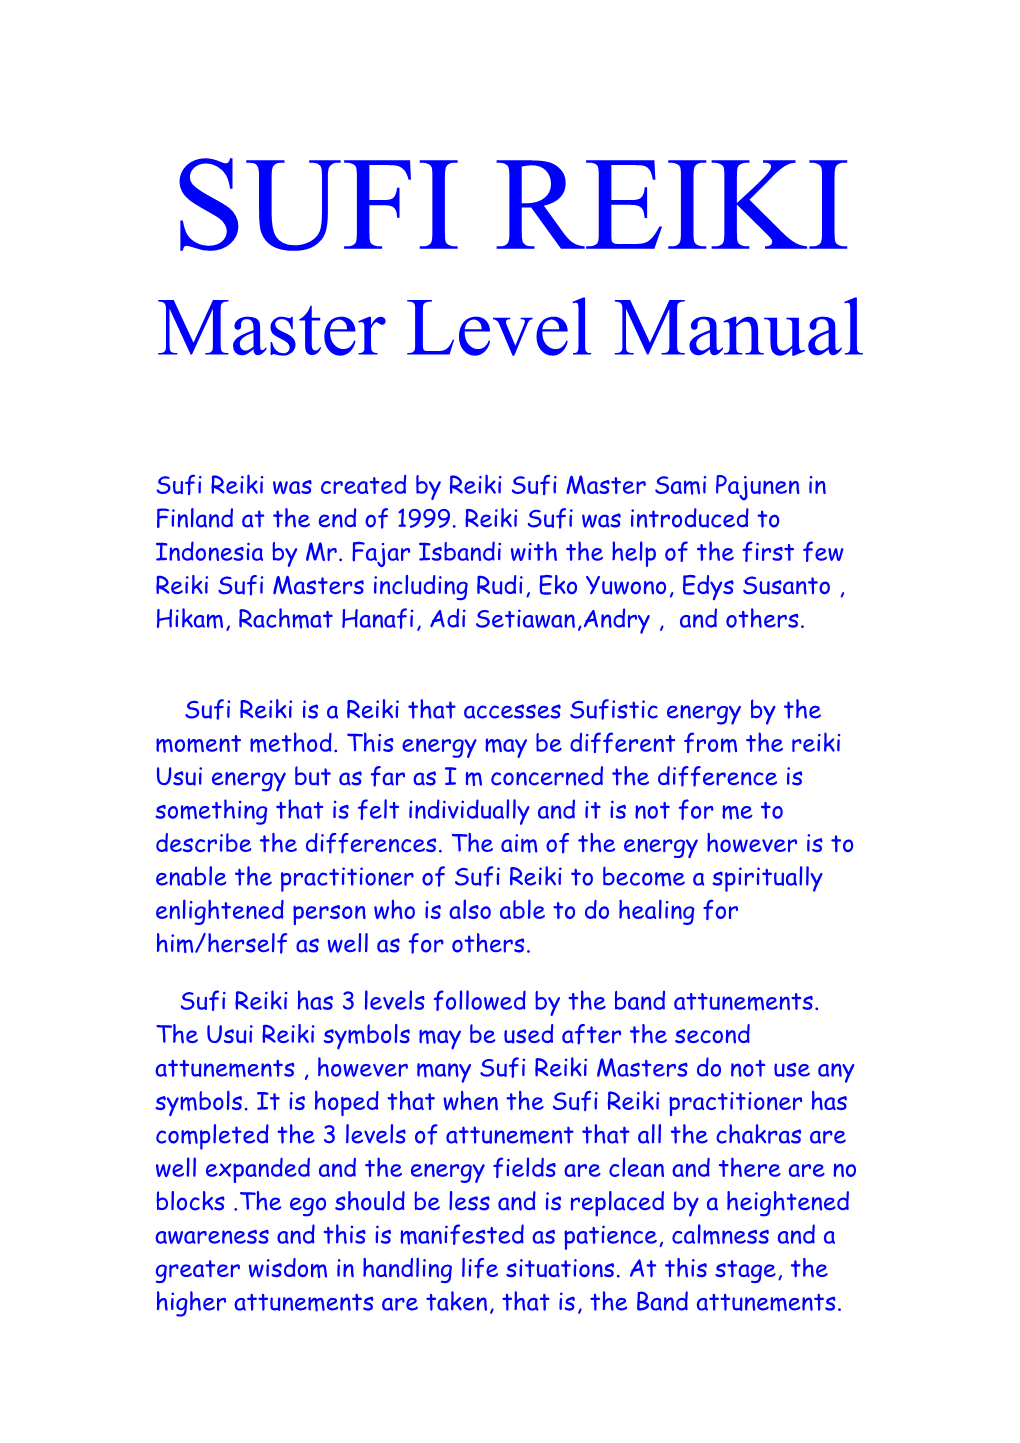 Sufi Reiki Was Created by Reiki Sufi Master Sami Pajunen in Finland at the End of 1999